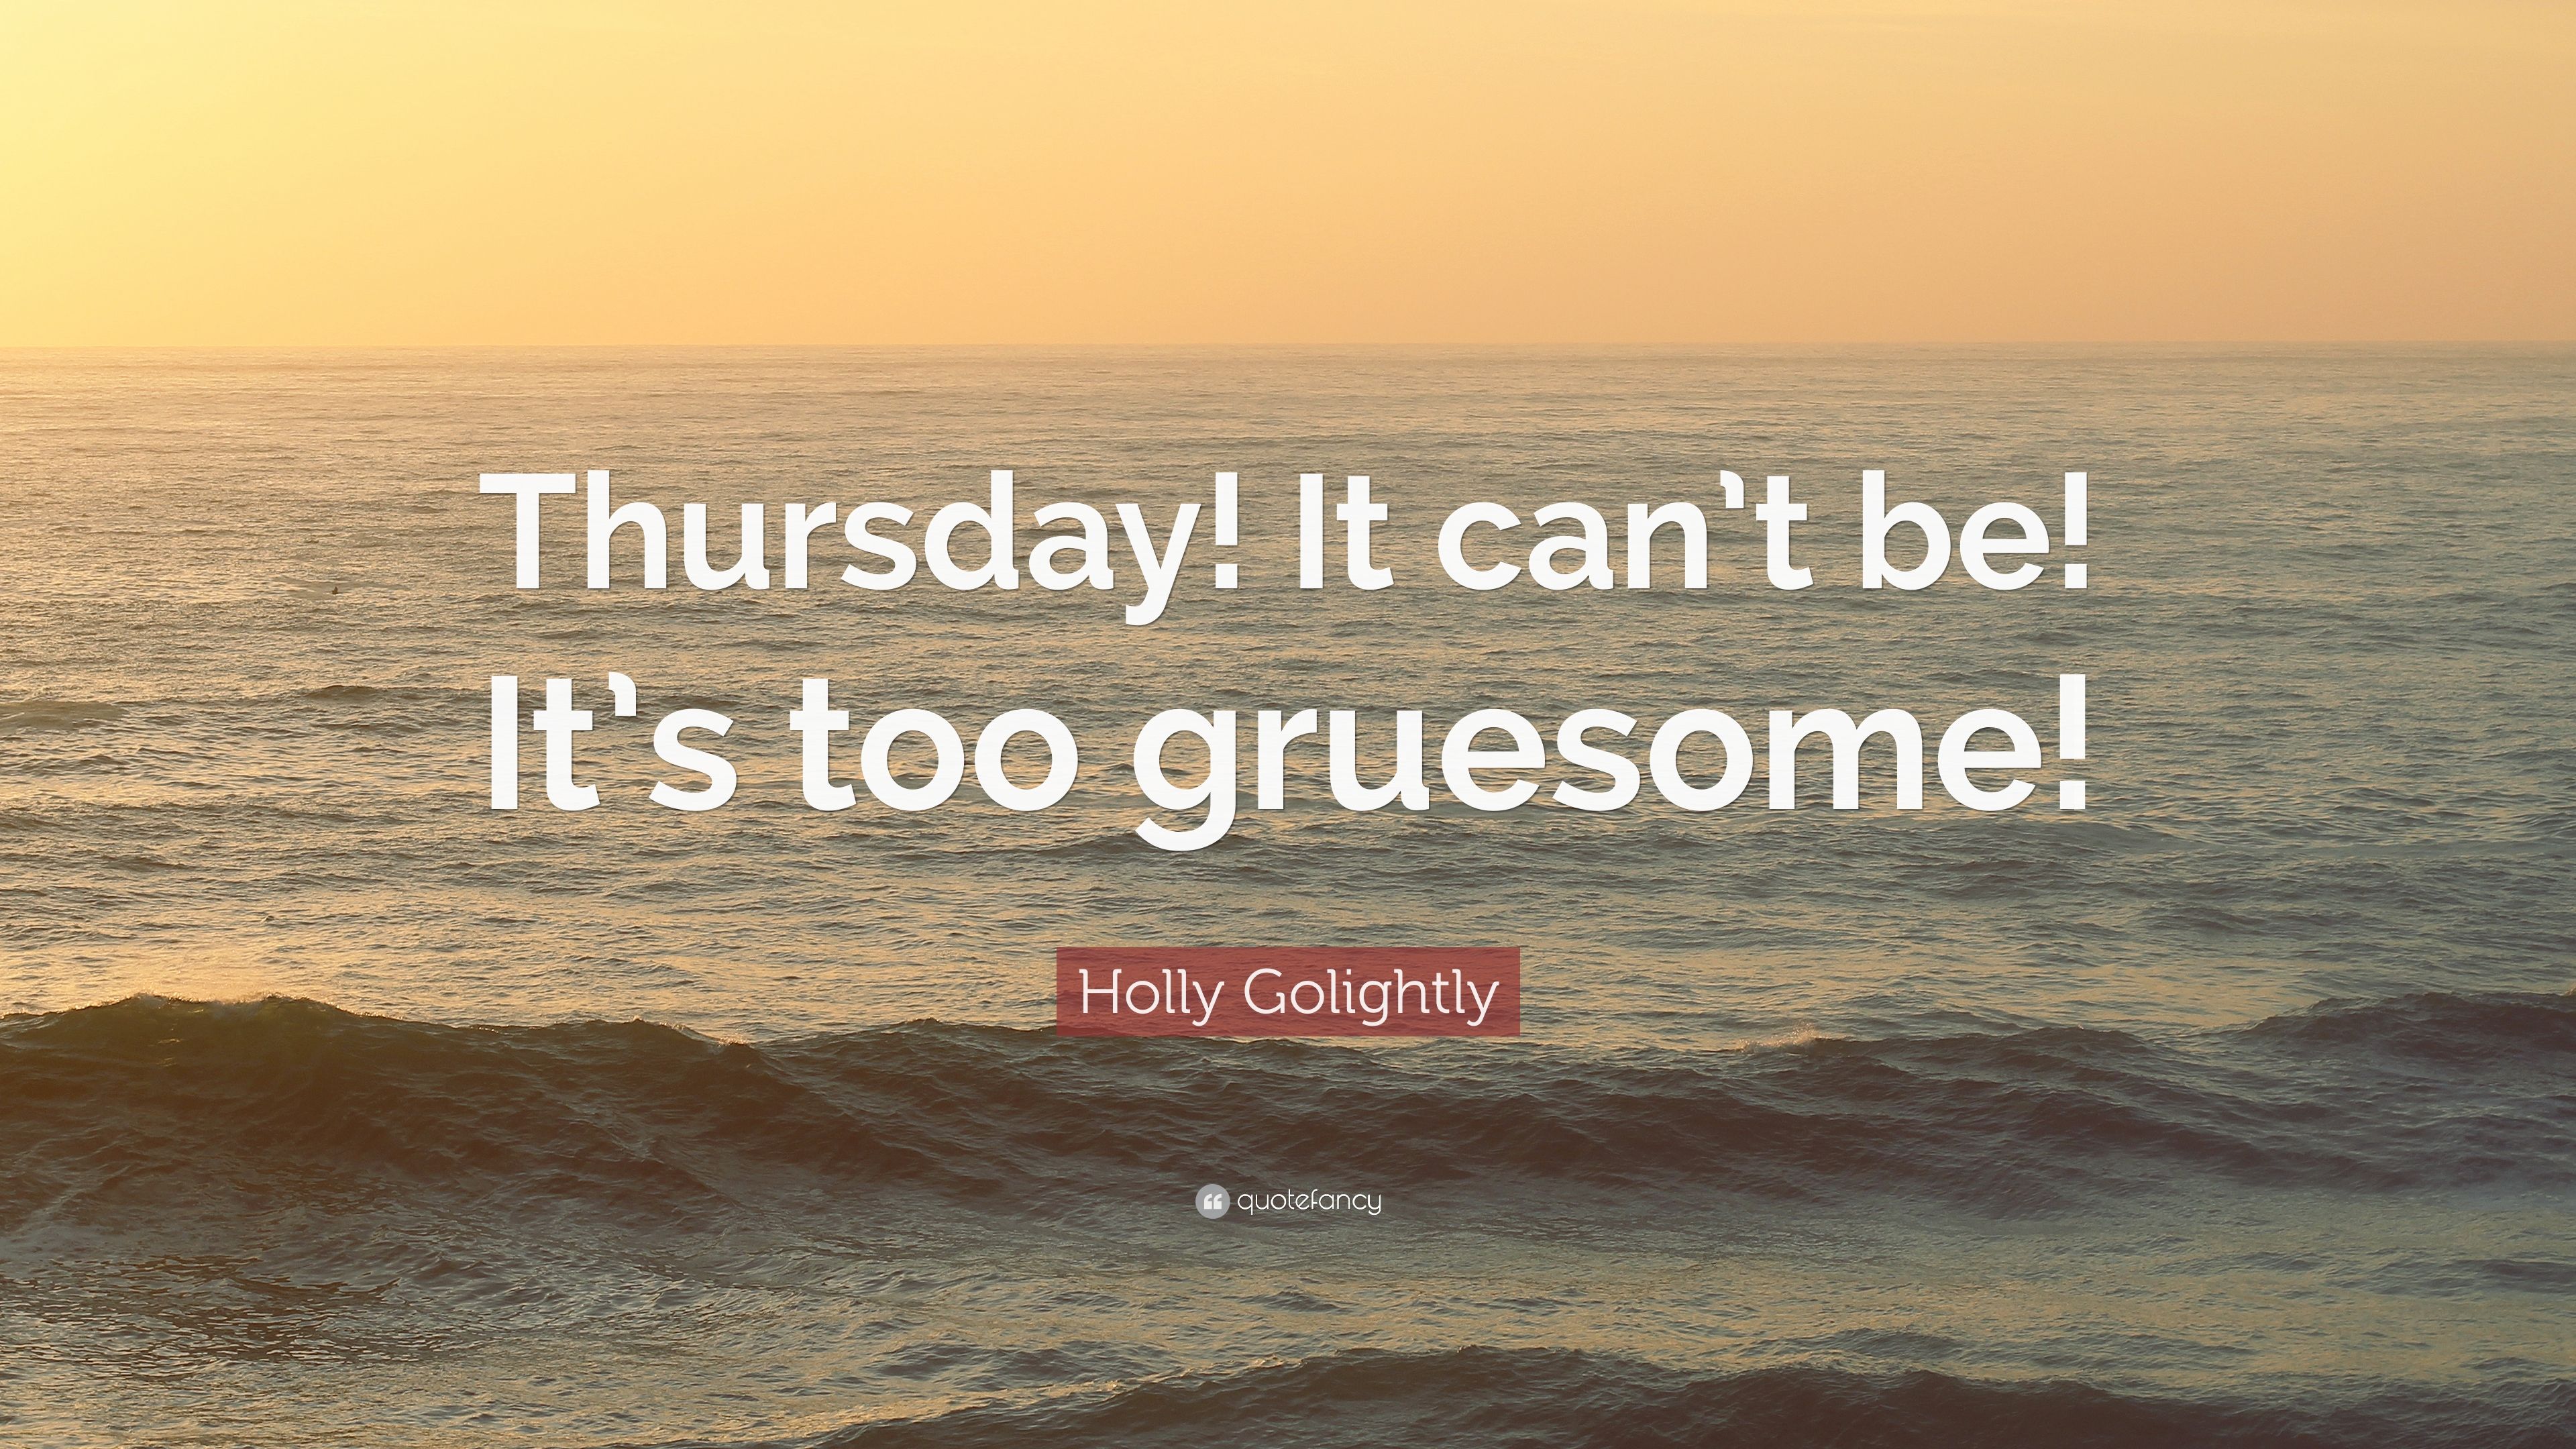 Holly Golightly Quote: “Thursday! It can't be! It's too gruesome